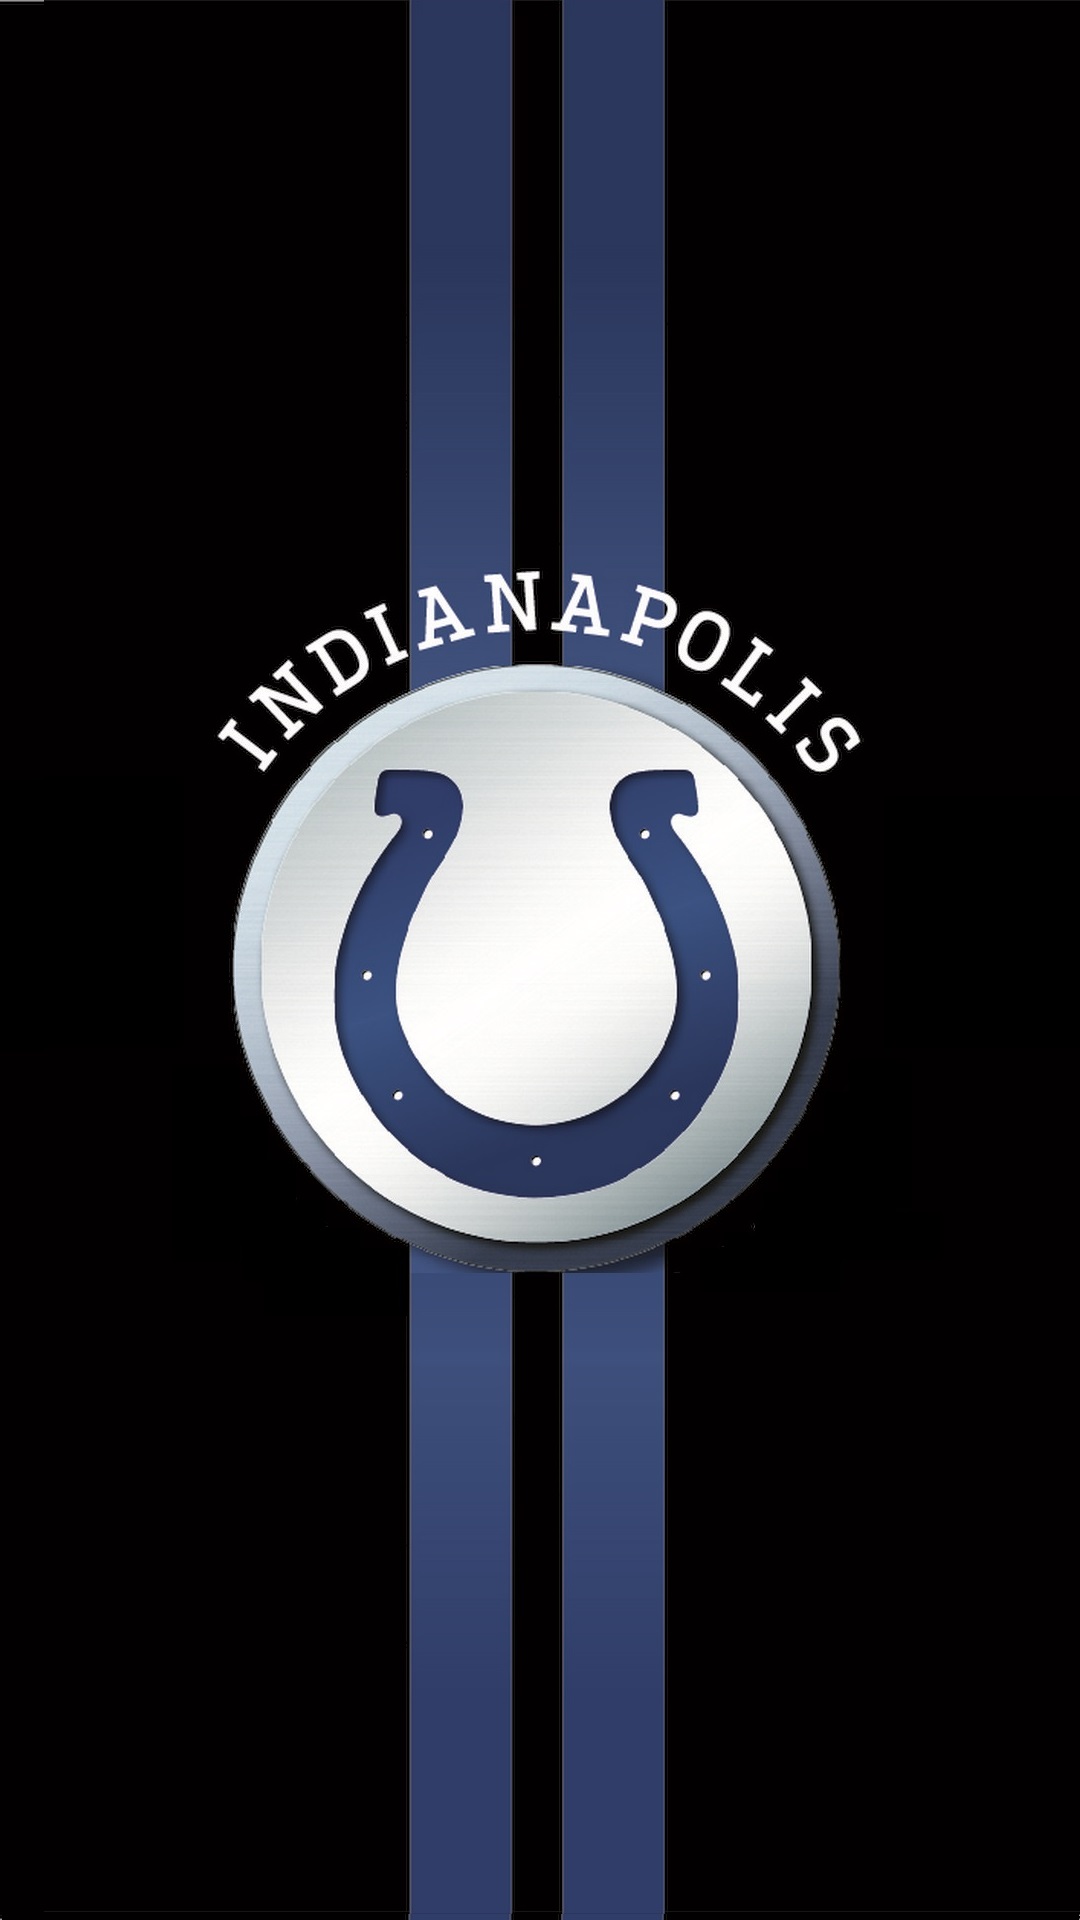 Indianapolis Colts iPhone 8 Wallpaper With high-resolution 1080X1920 pixel. Download and set as wallpaper for Desktop Computer, Apple iPhone X, XS Max, XR, 8, 7, 6, SE, iPad, Android